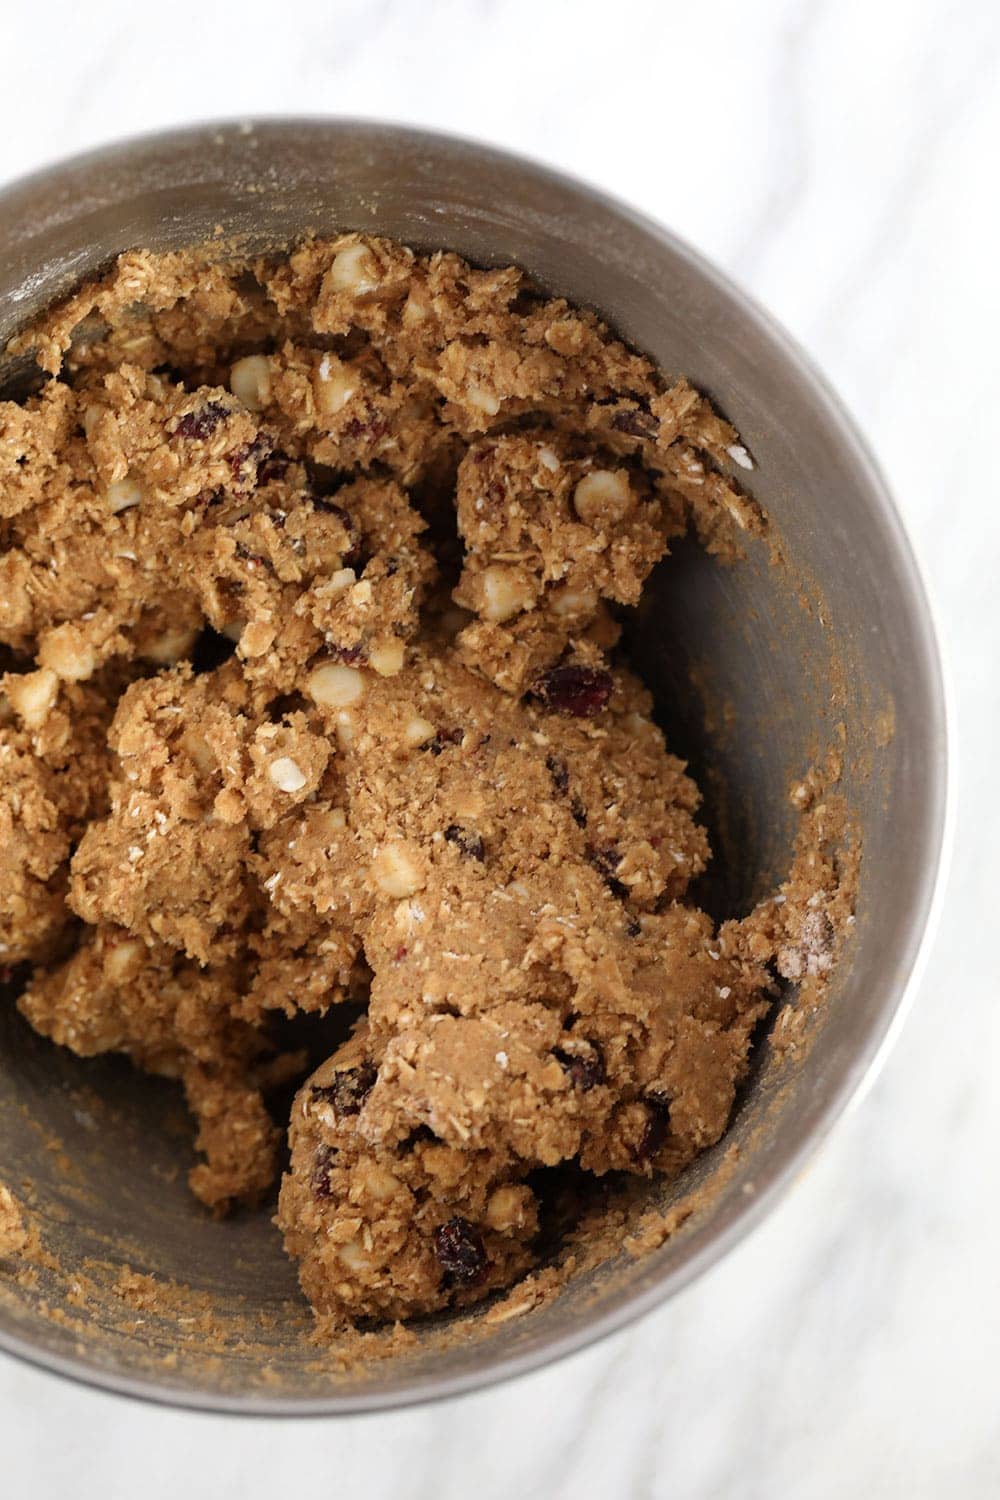 white chocolate cranberry oatmeal cookie batter in a bowl